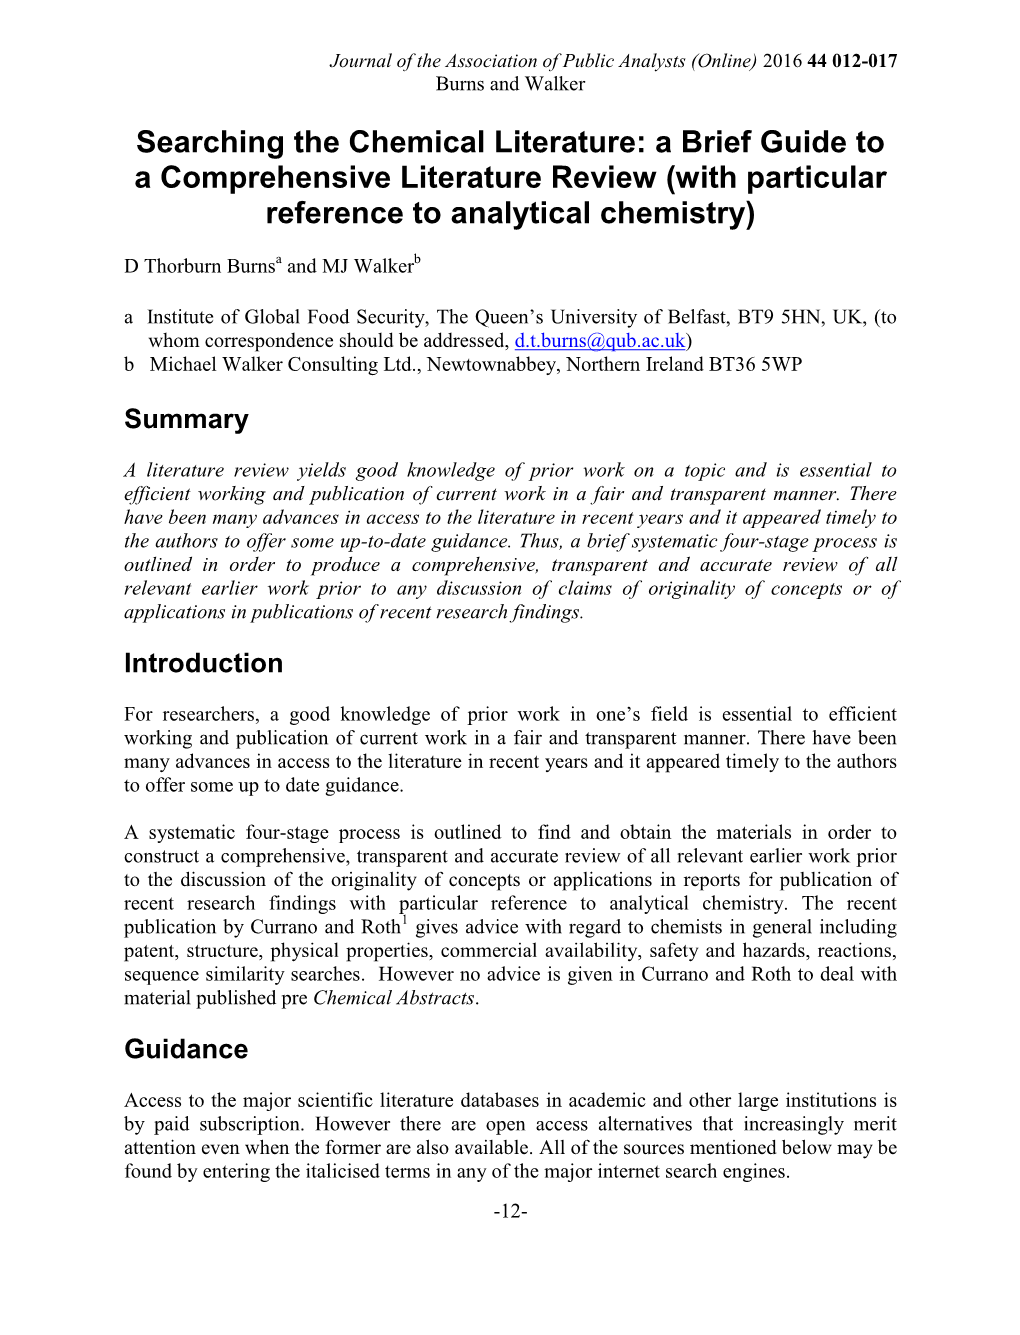 Searching the Chemical Literature: a Brief Guide to a Comprehensive Literature Review (With Particular Reference to Analytical Chemistry)